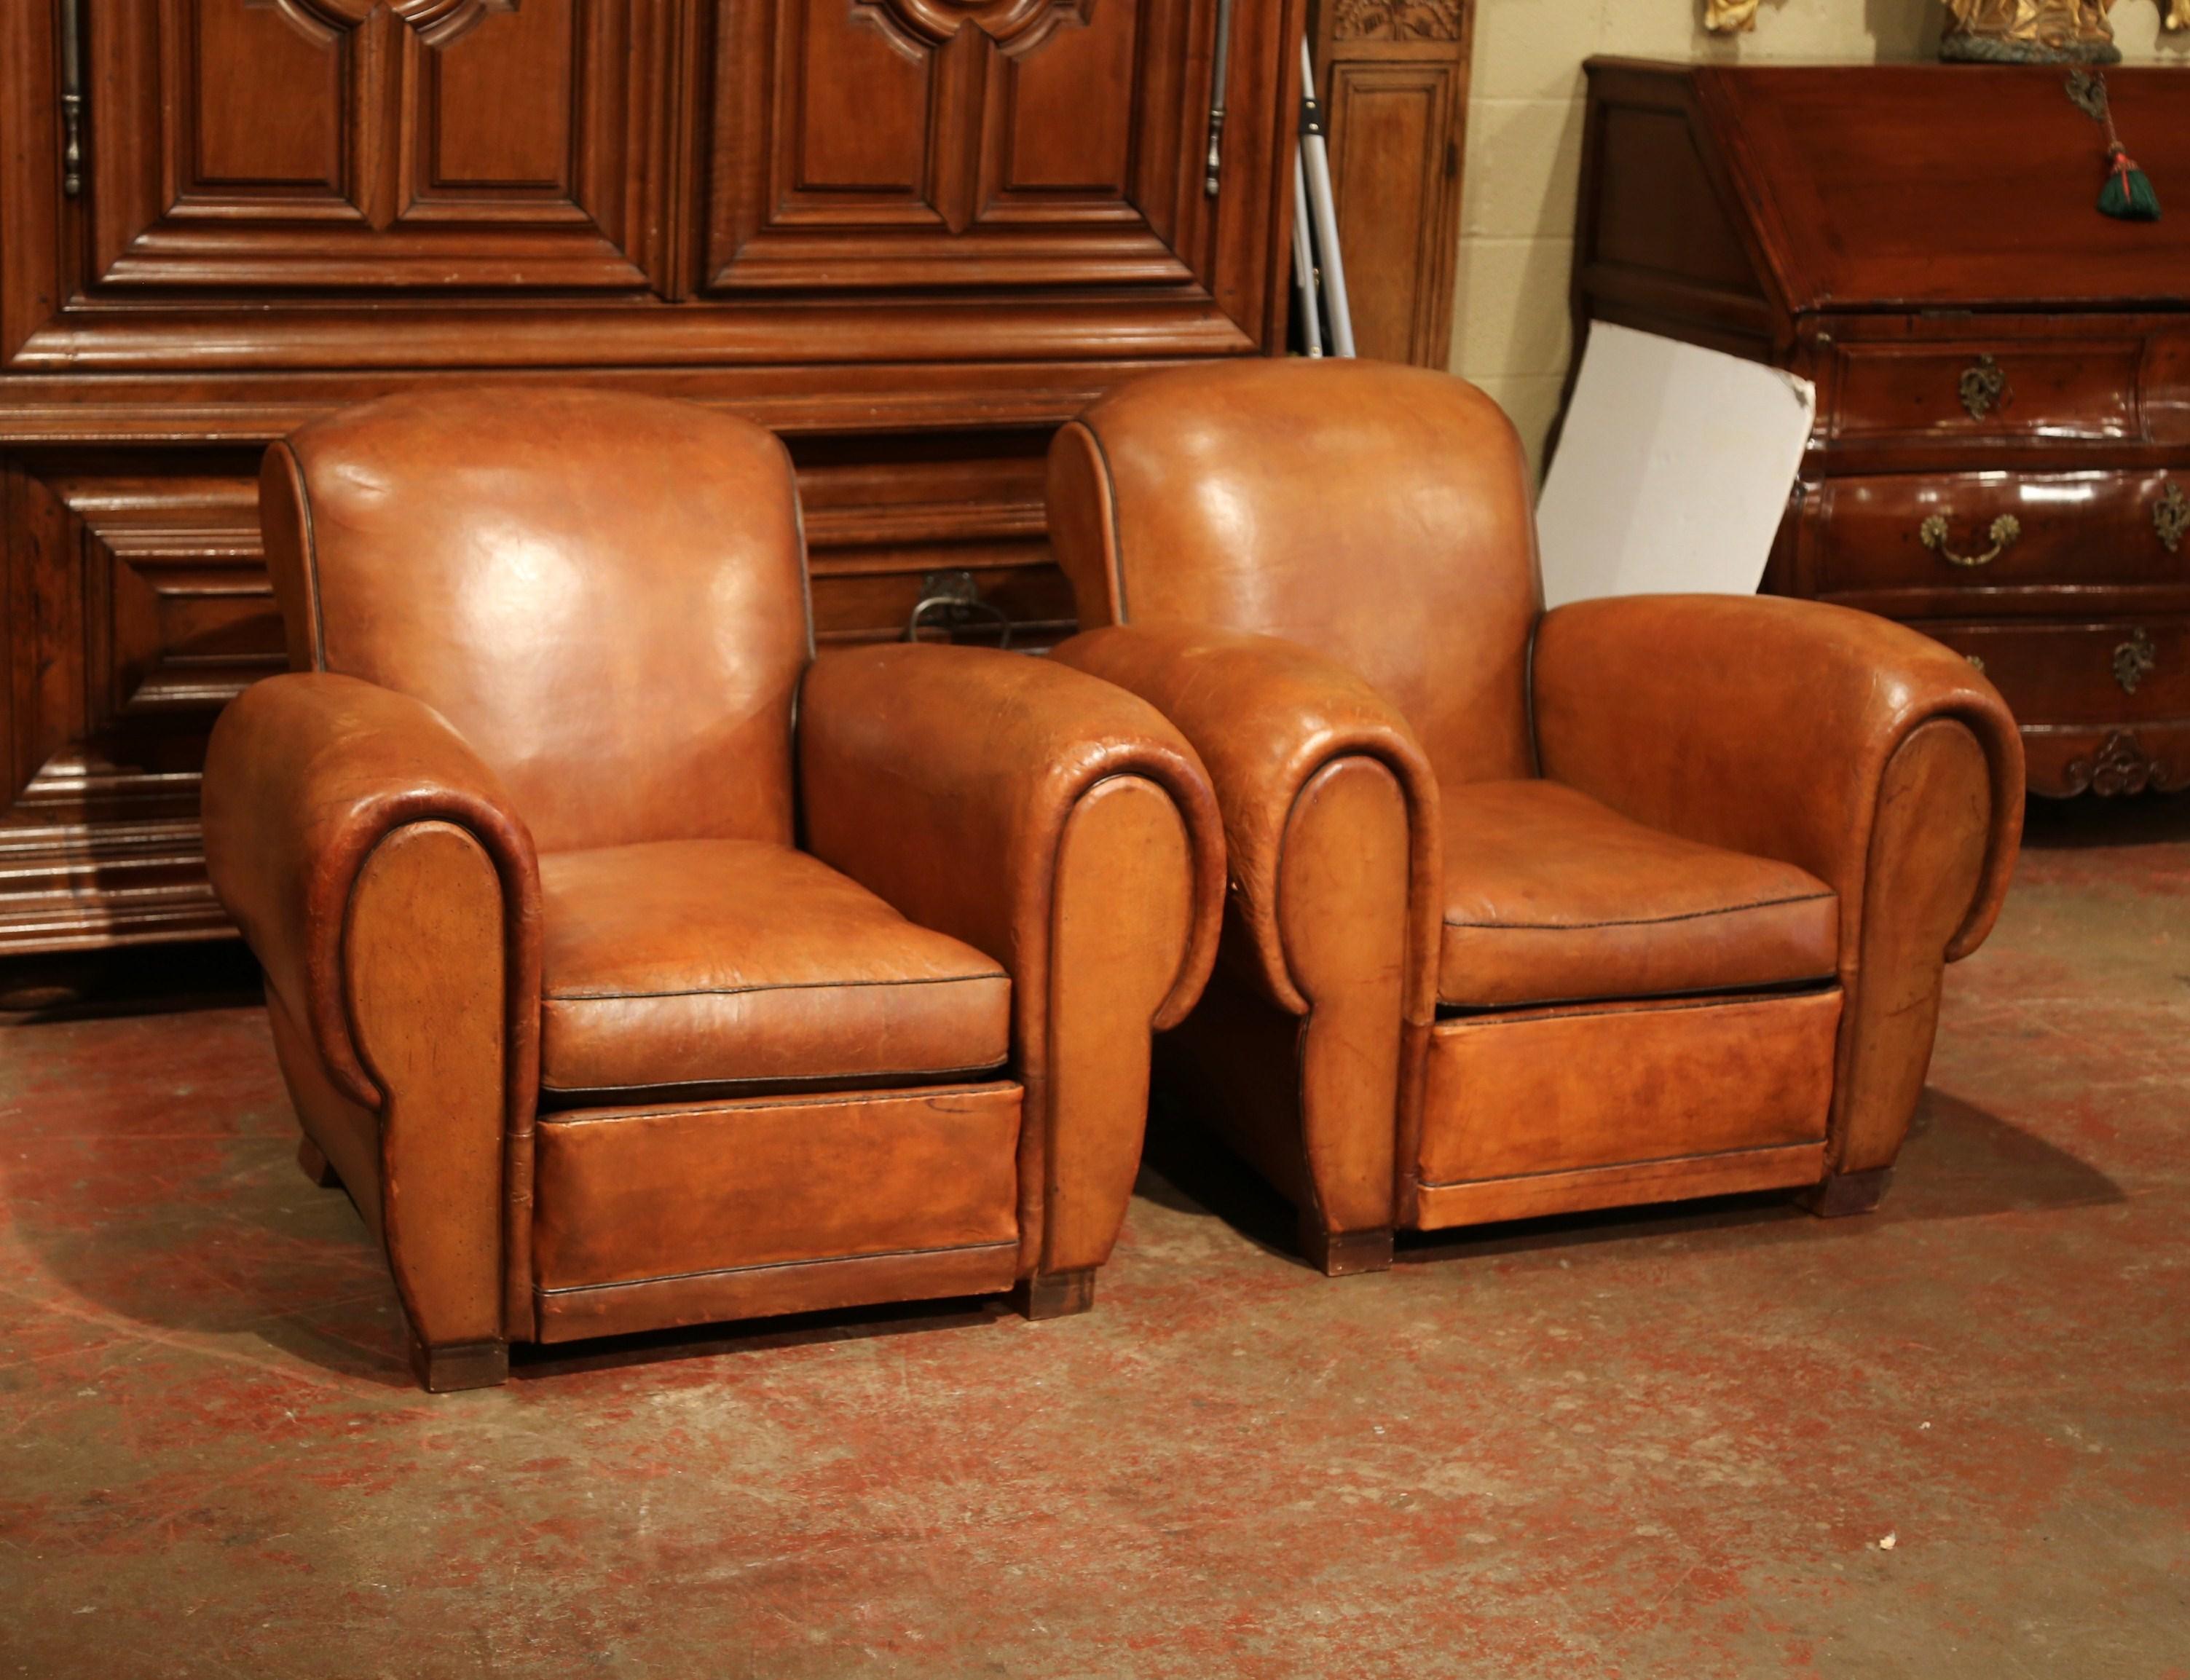 These antique Art Deco club chairs were crafted in France, circa 1920. The stately chairs feature wide, rounded armrests, a pitch back with a curved shape at the top, and square wooden feet at the base. The comfortable armchairs are in very good